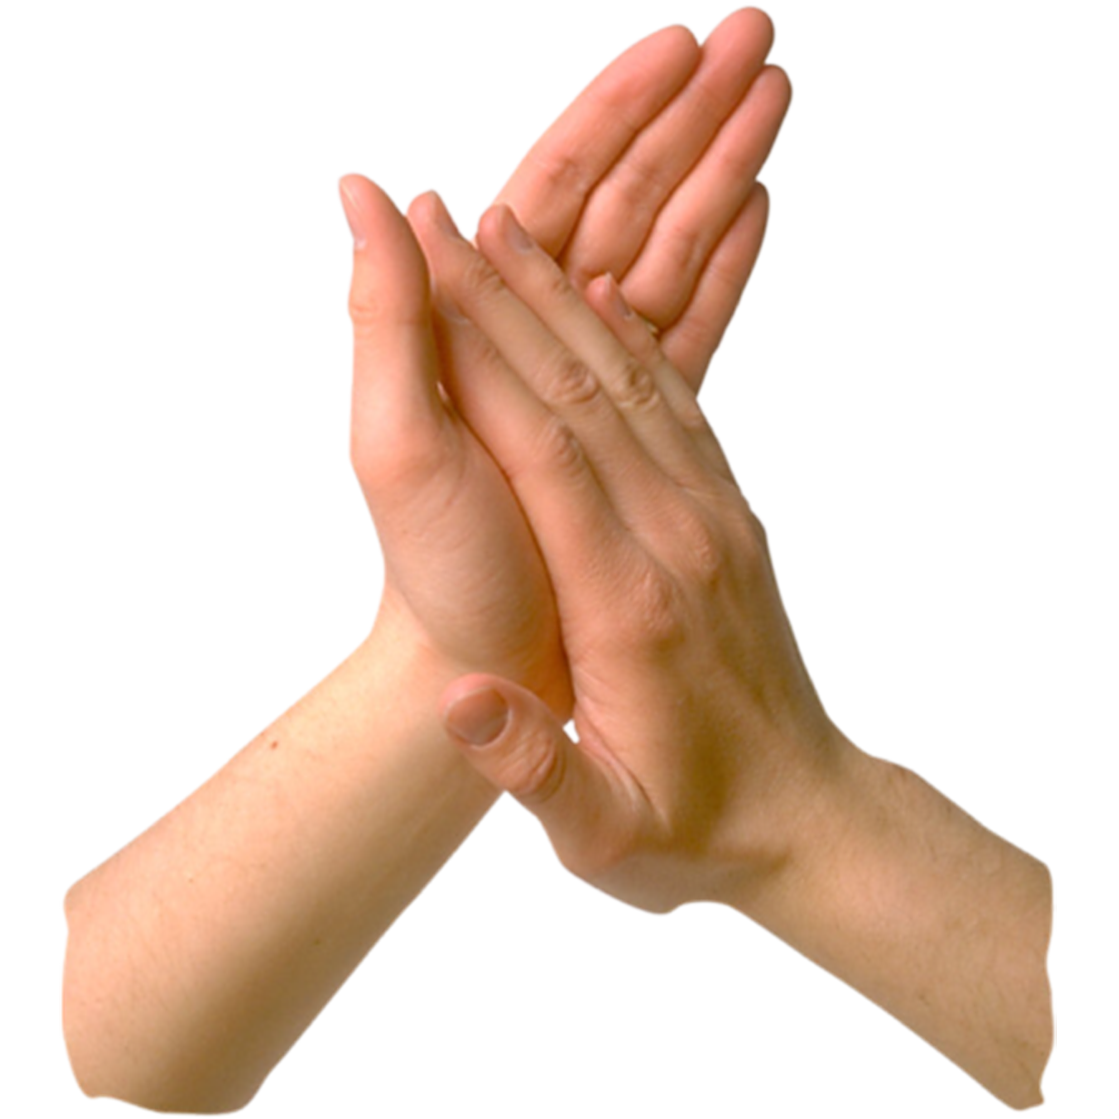 Clapping Hands Png High Quality Image Png All